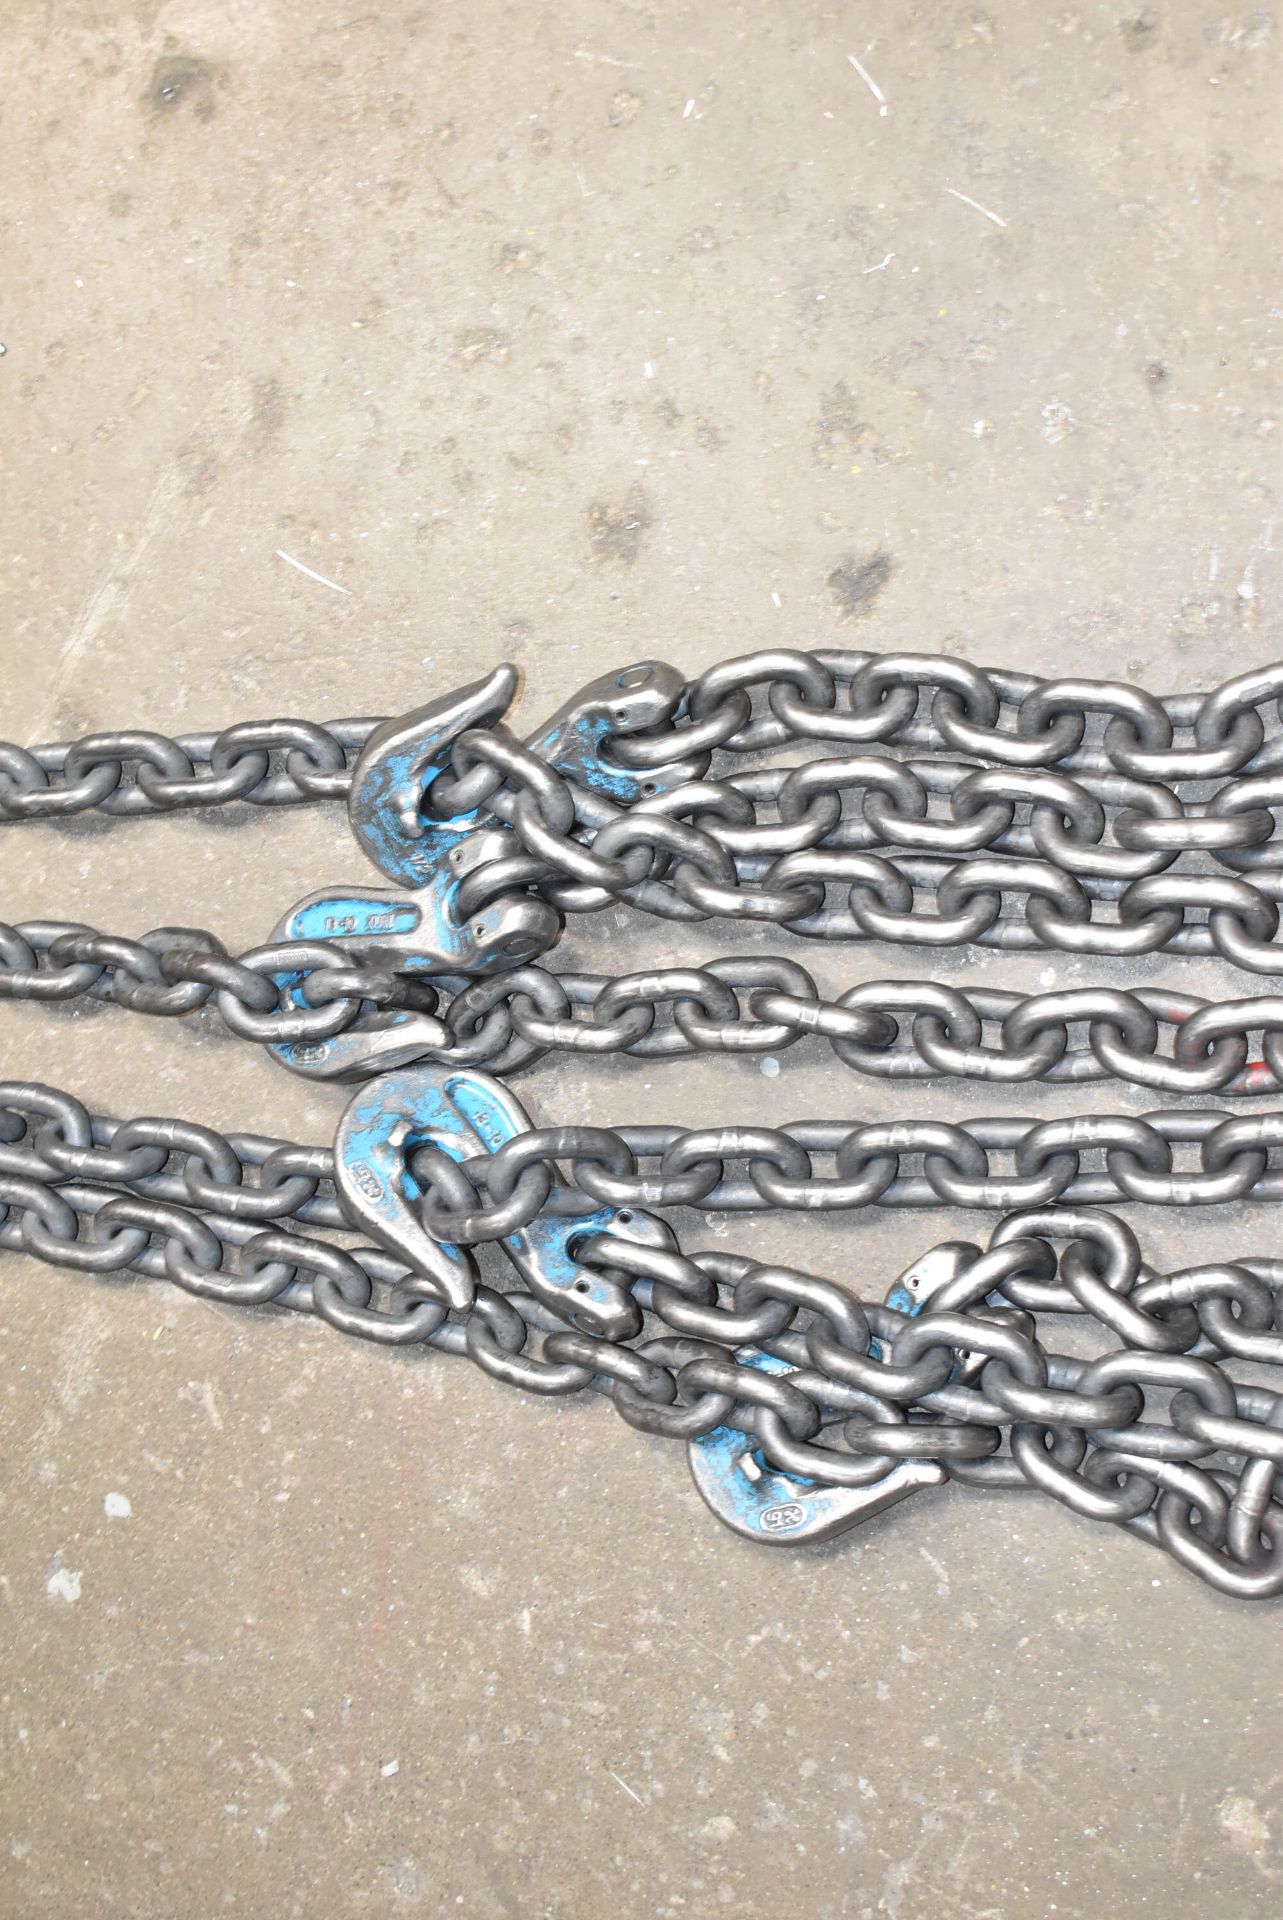 8’ 7” FOUR-POINT LIFTING CHAIN WITH 39,000 LB CAPACITY, S/N N/A - Image 2 of 5